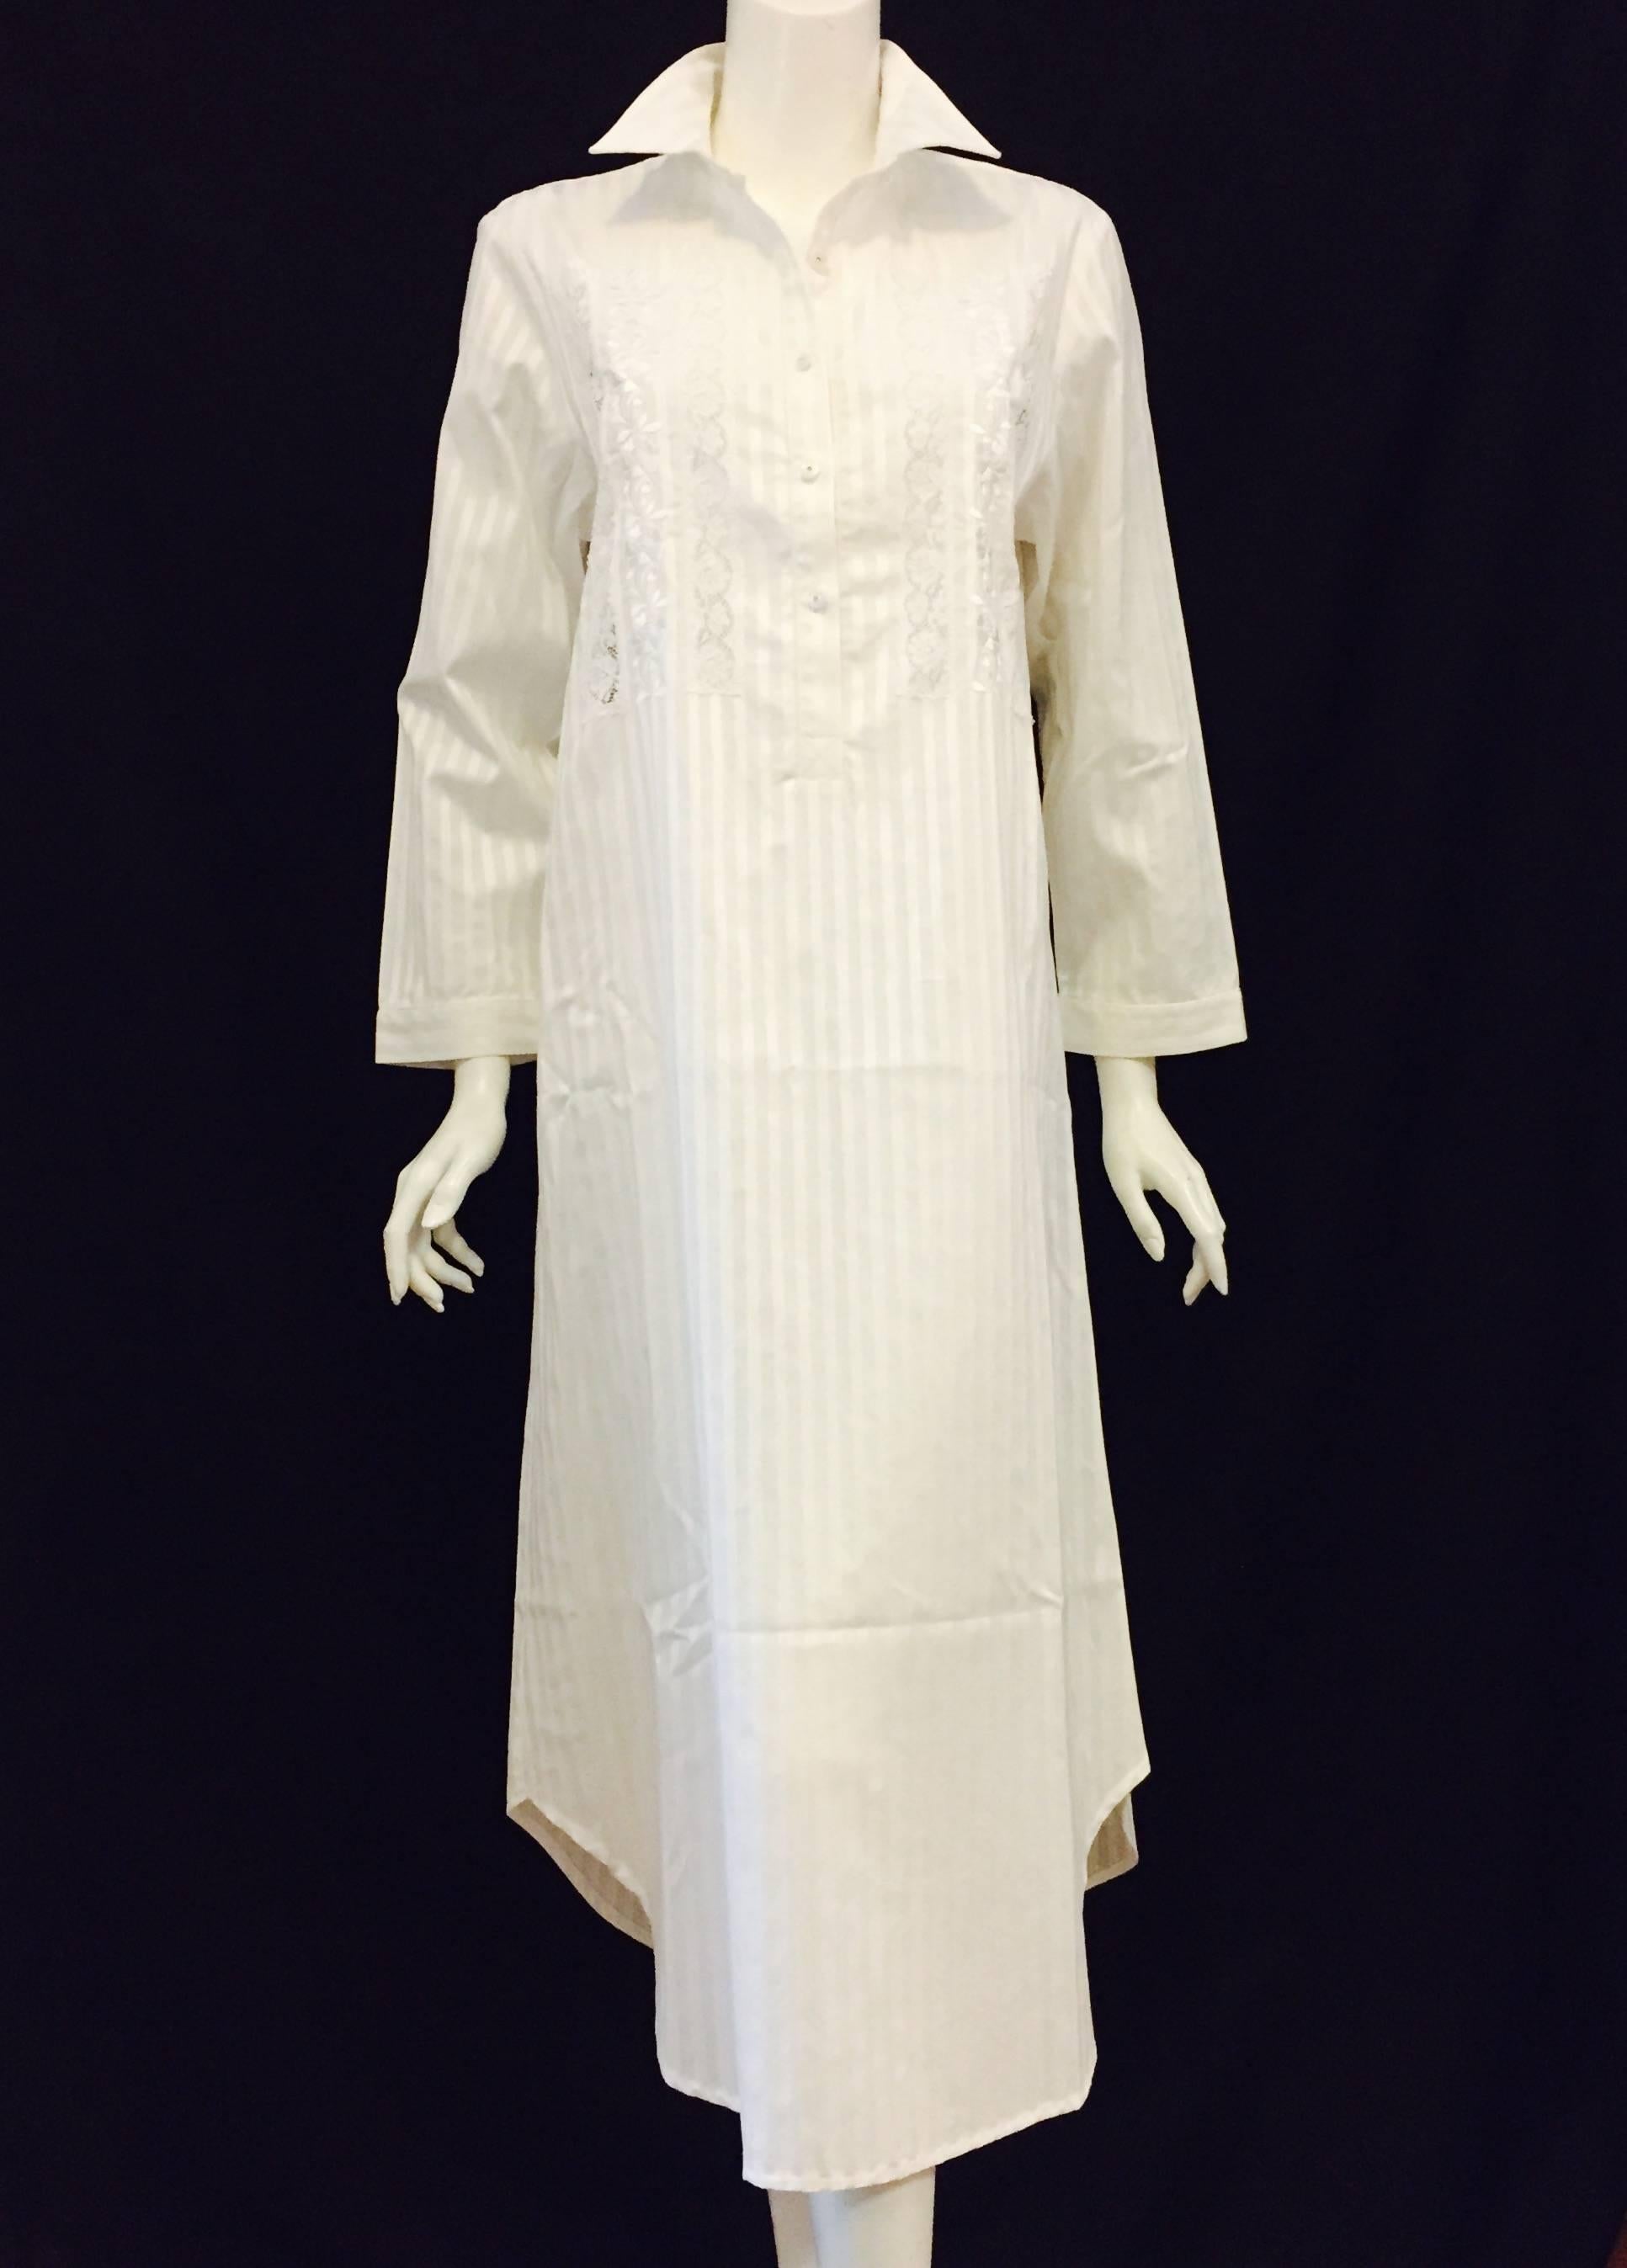 Outstanding Oscar de la Renta Beach Cover Up in White on White Cotton In Excellent Condition For Sale In Palm Beach, FL